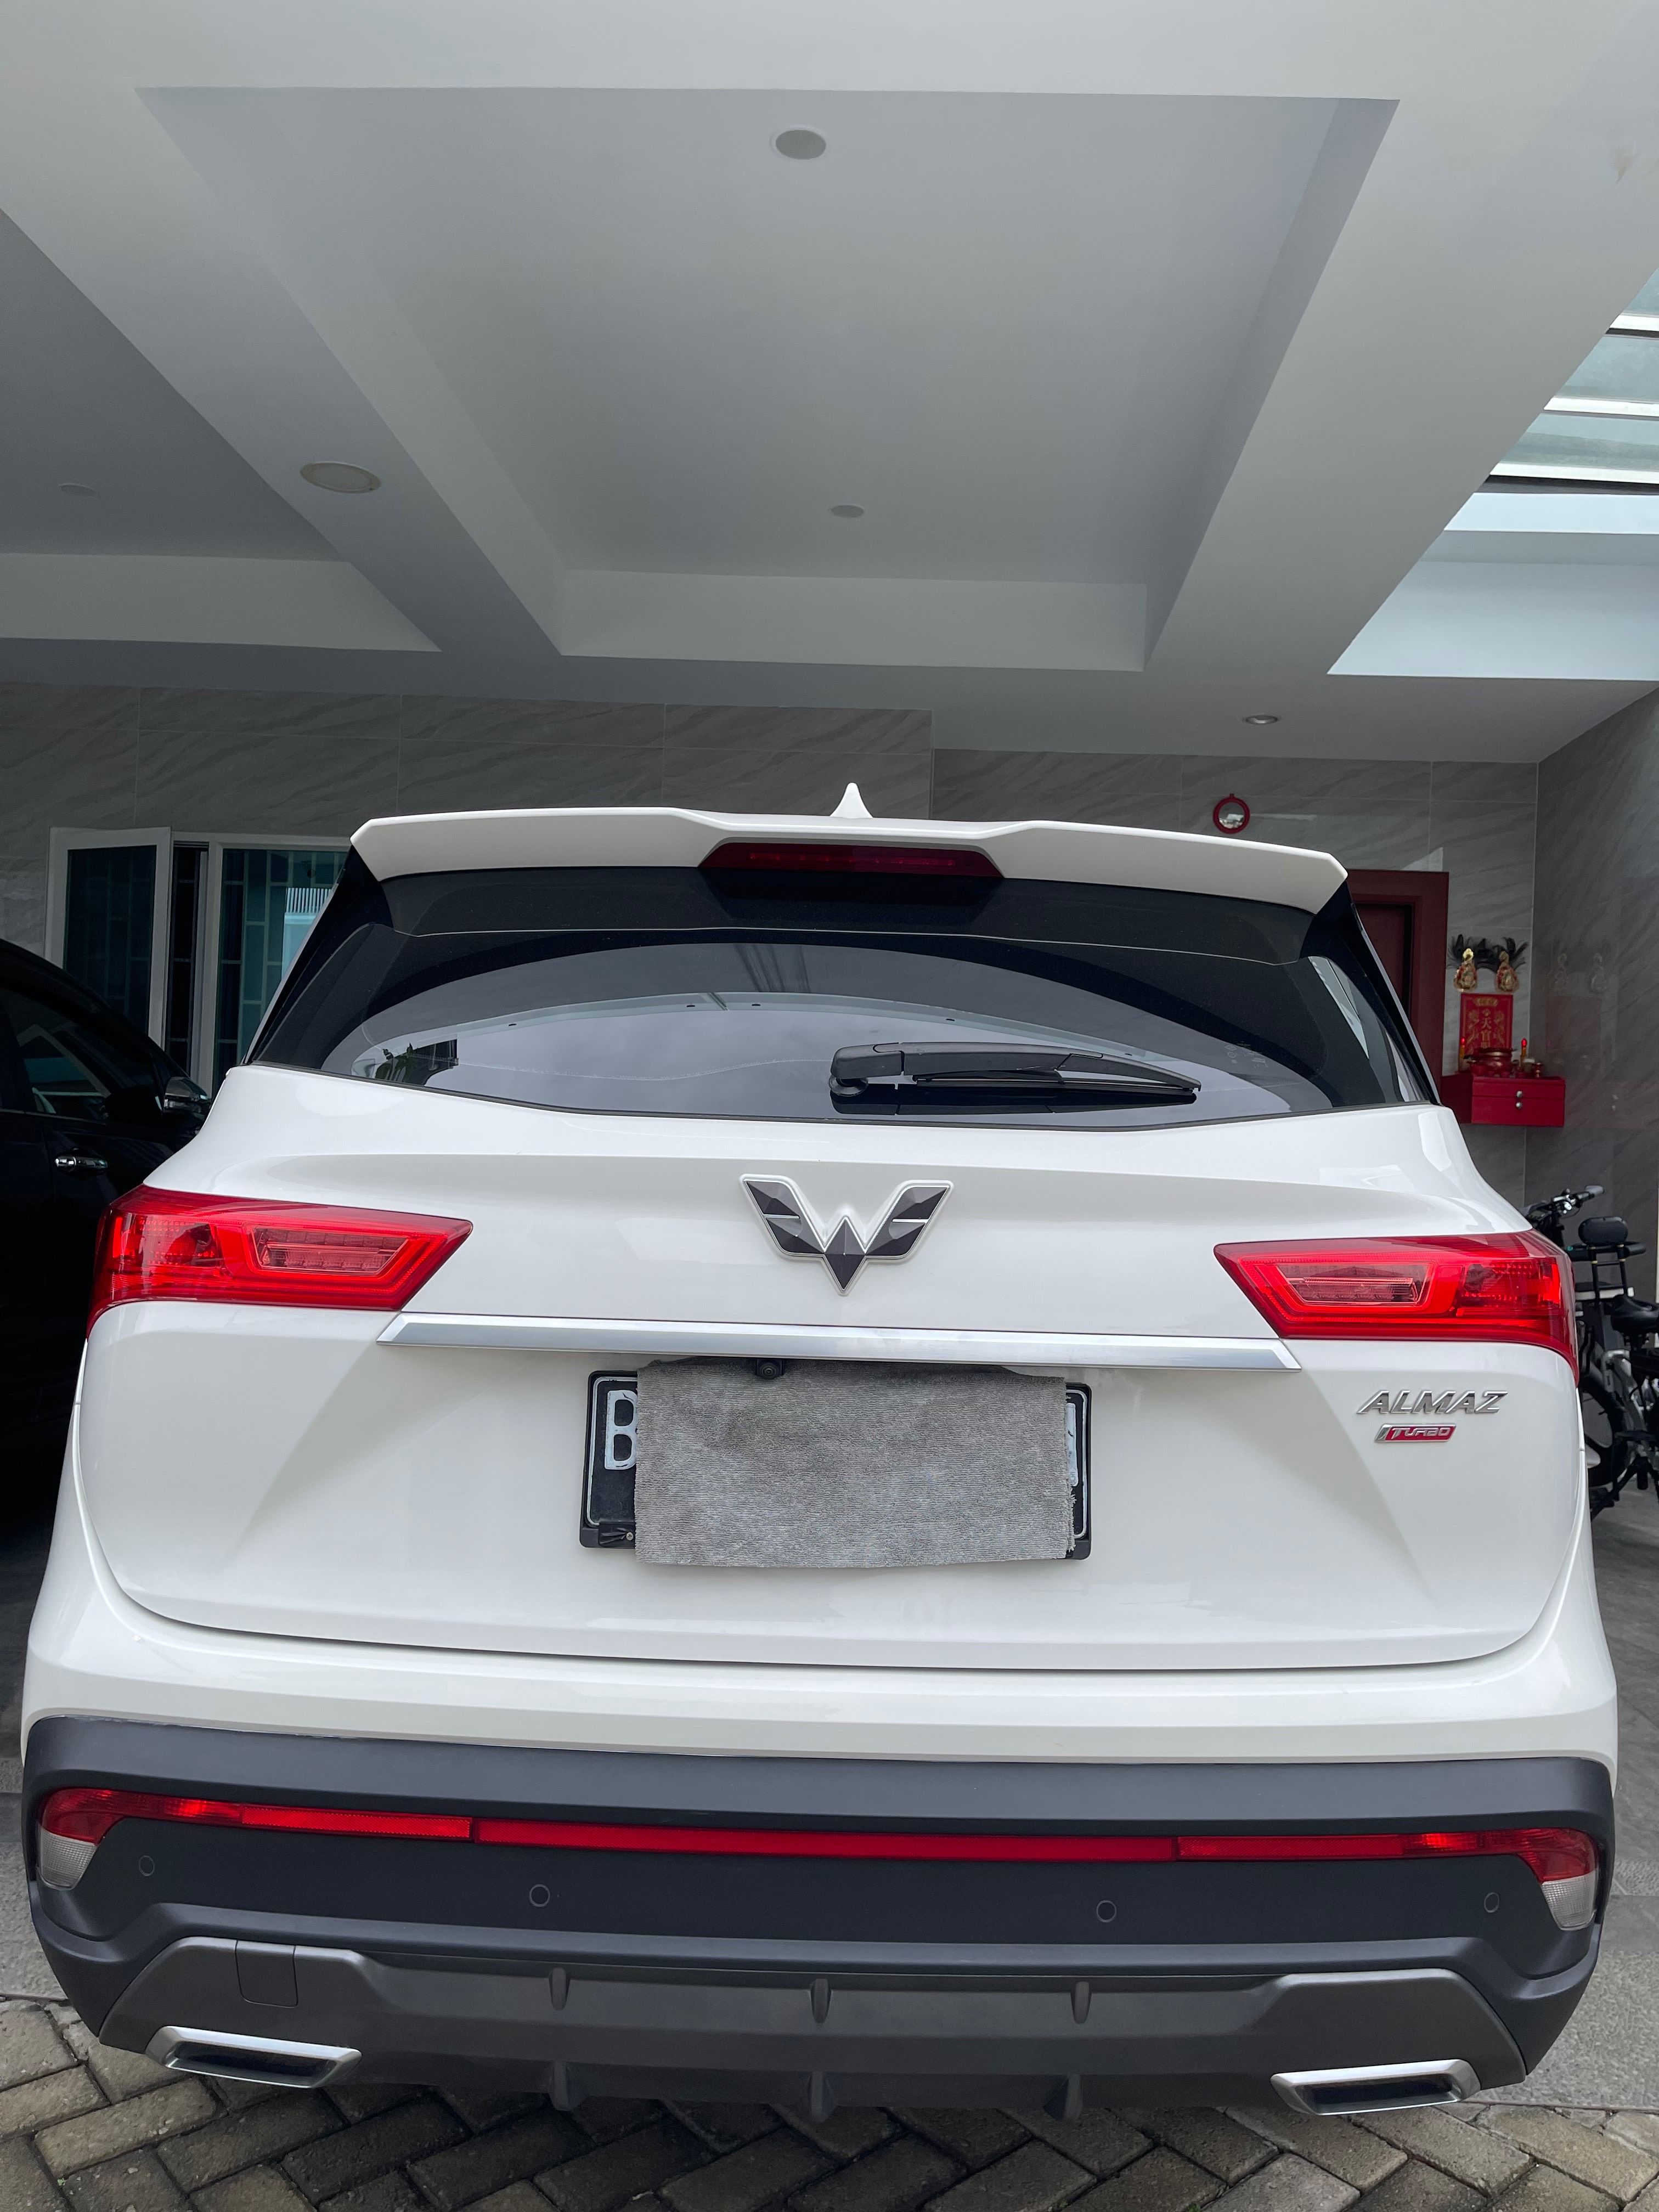 Old 2019 Wuling Almaz 1.5 TURBO LUX AT 1.5 TURBO LUX AT